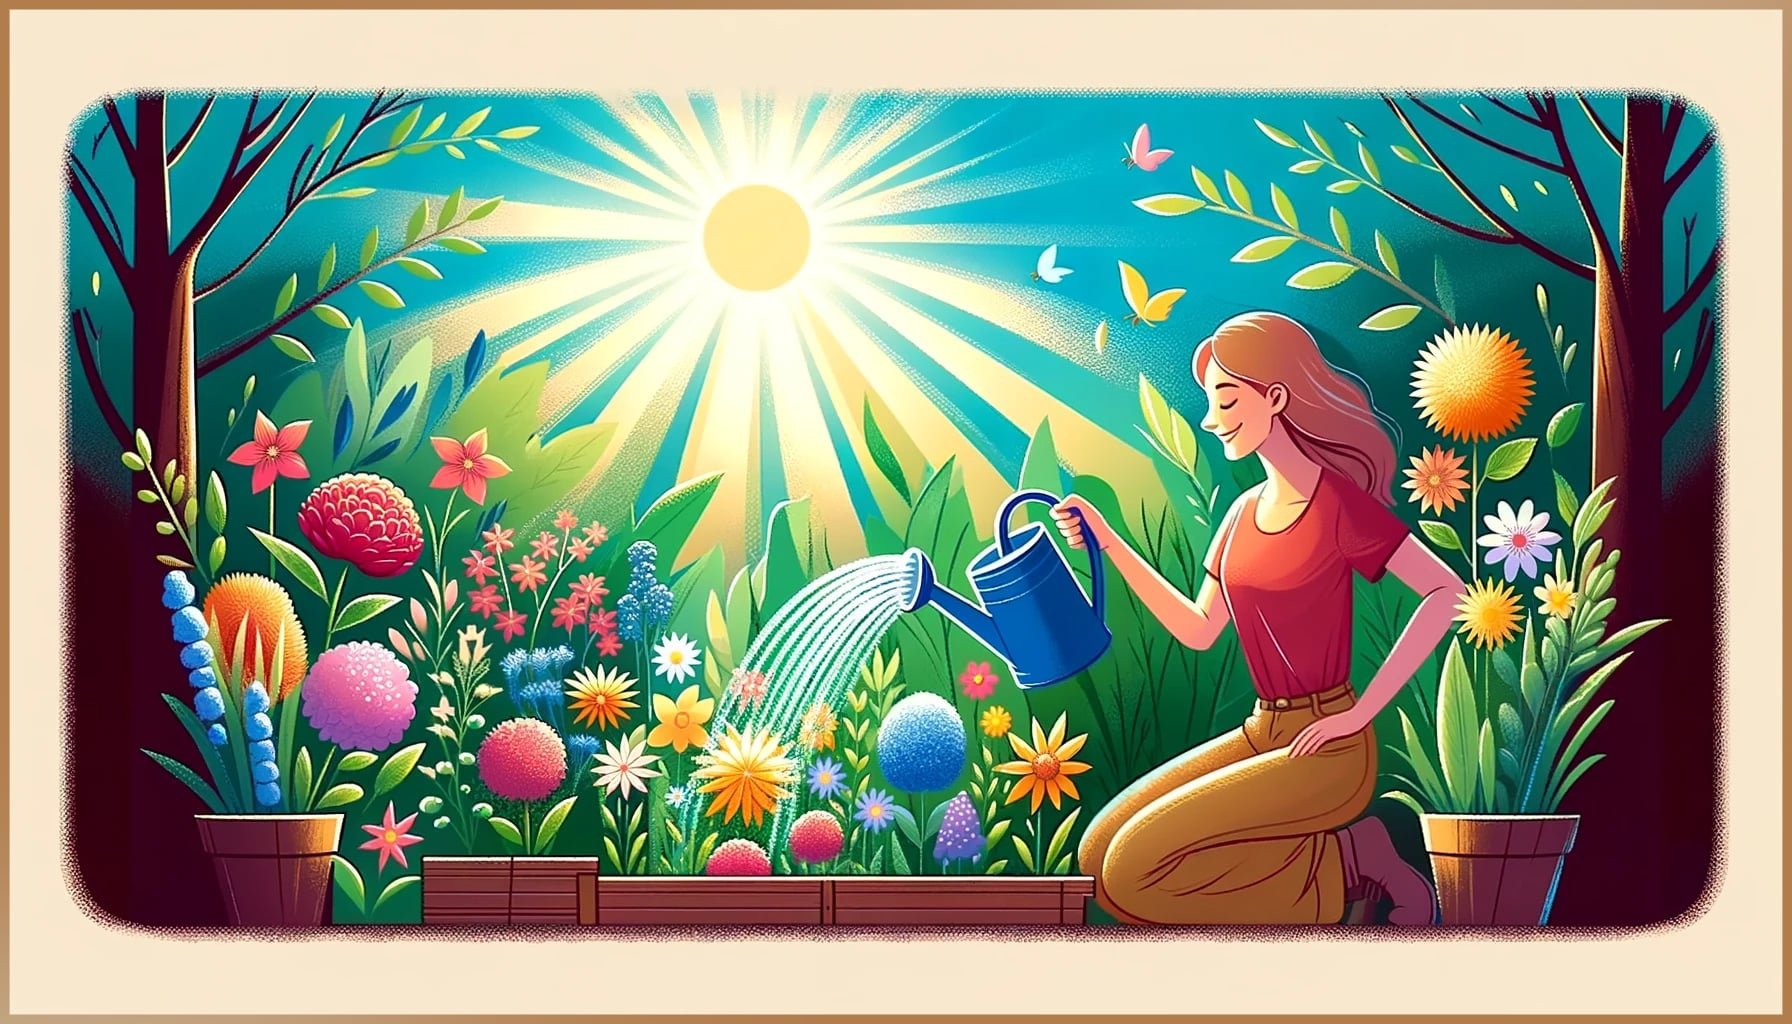 A woman joyfully watering a vibrant garden full of colorful flowers, symbolizing self-care and personal growth.